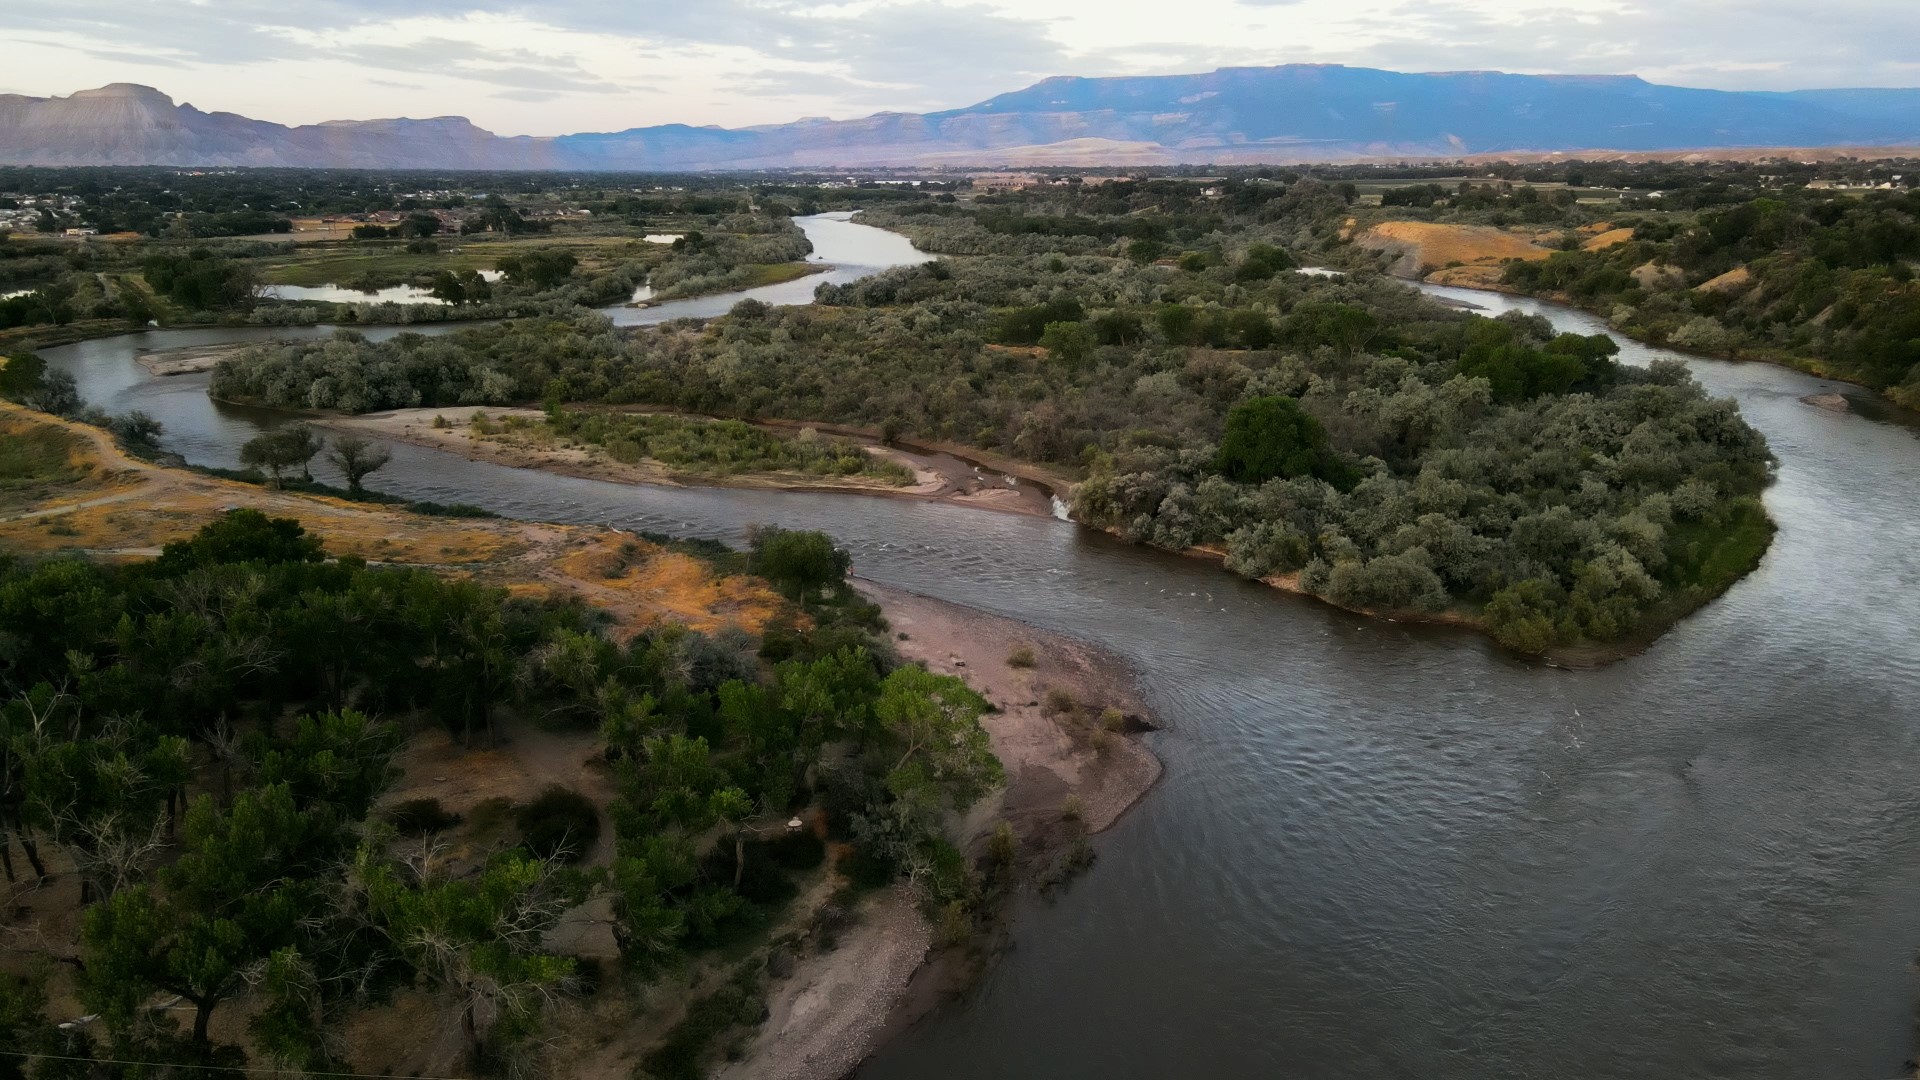 For more than 100 years the Colorado River’s water has been split between seven states, Native American tribes and Mexico. But there's not enough to go around.